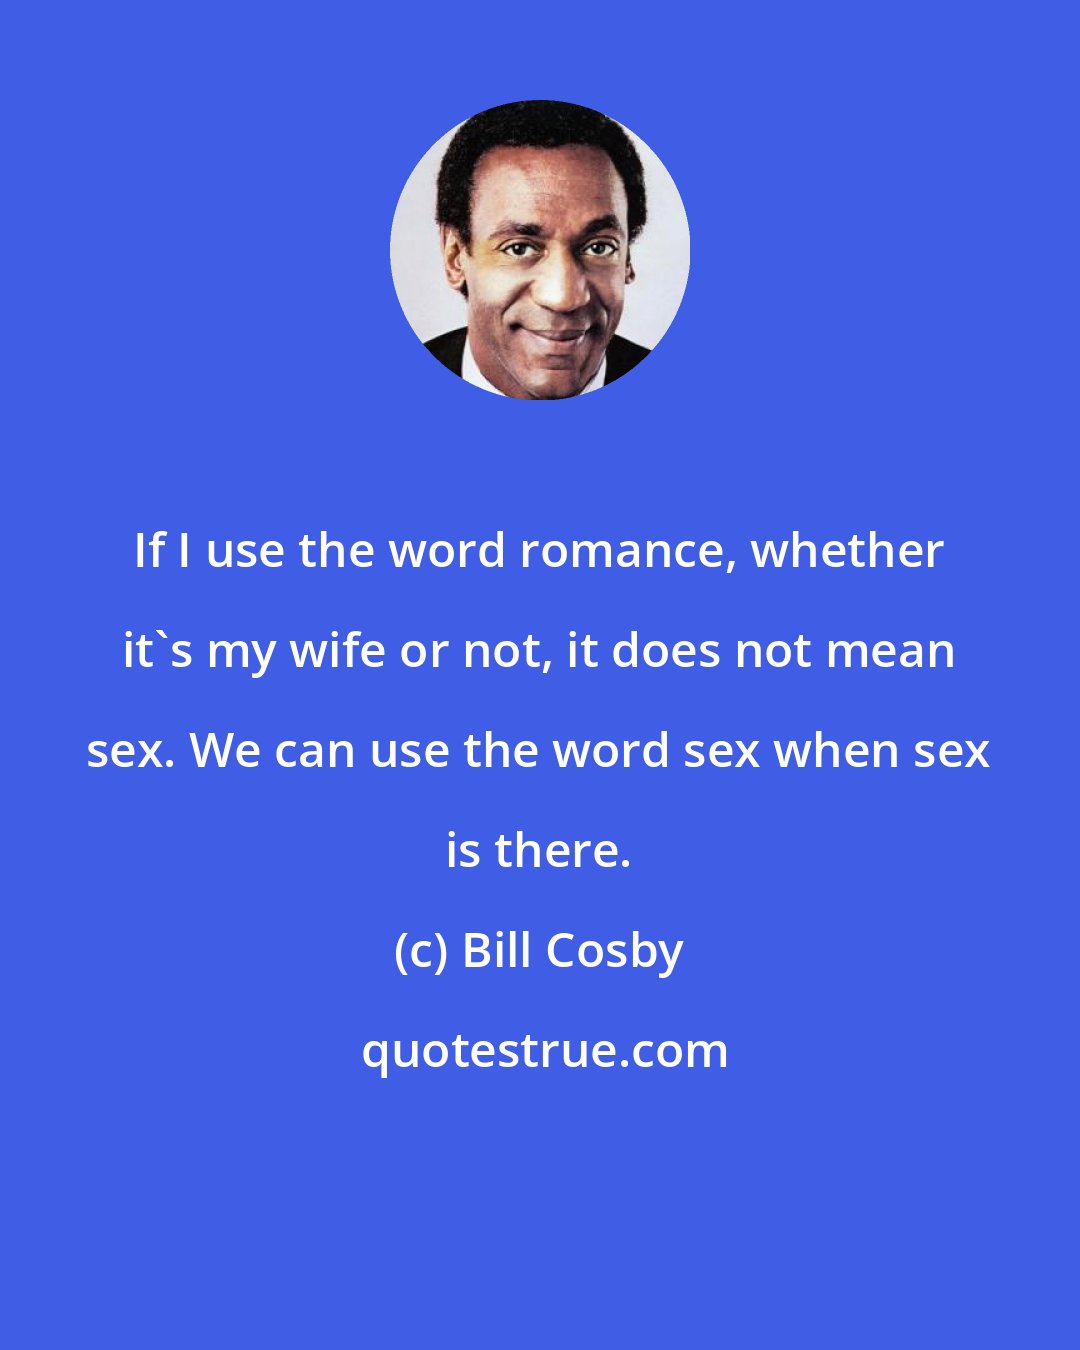 Bill Cosby: If I use the word romance, whether it's my wife or not, it does not mean sex. We can use the word sex when sex is there.